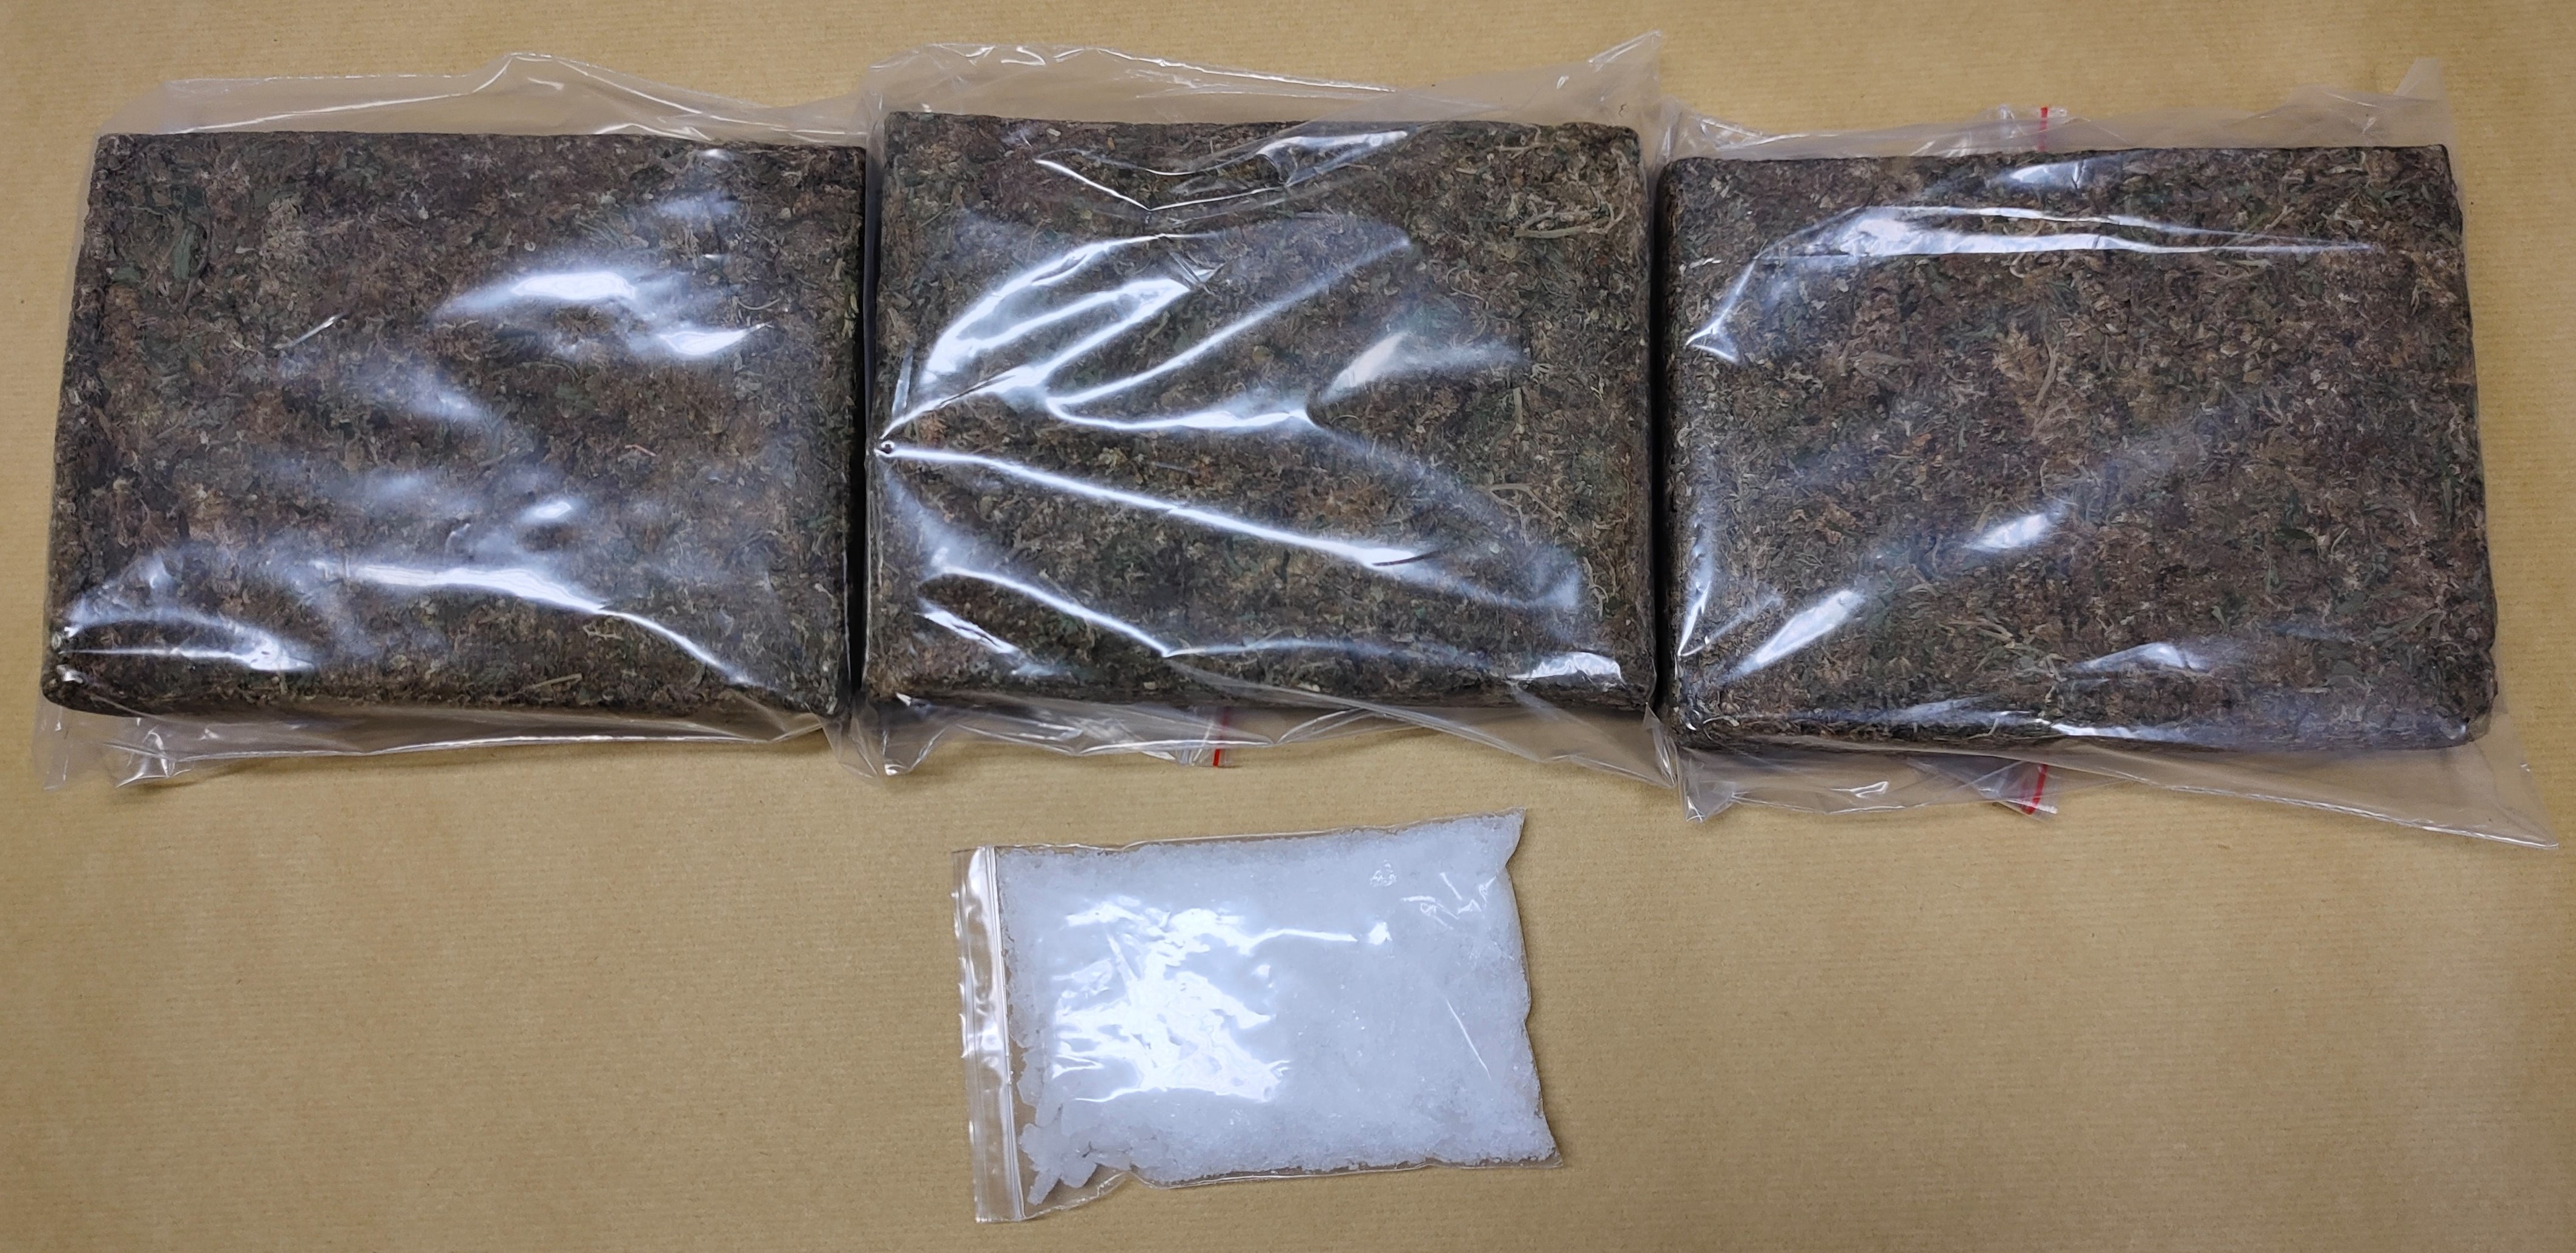 Drugs seized from within a Malaysia-registered car, at Tuas Checkpoint, on 6 February 2020